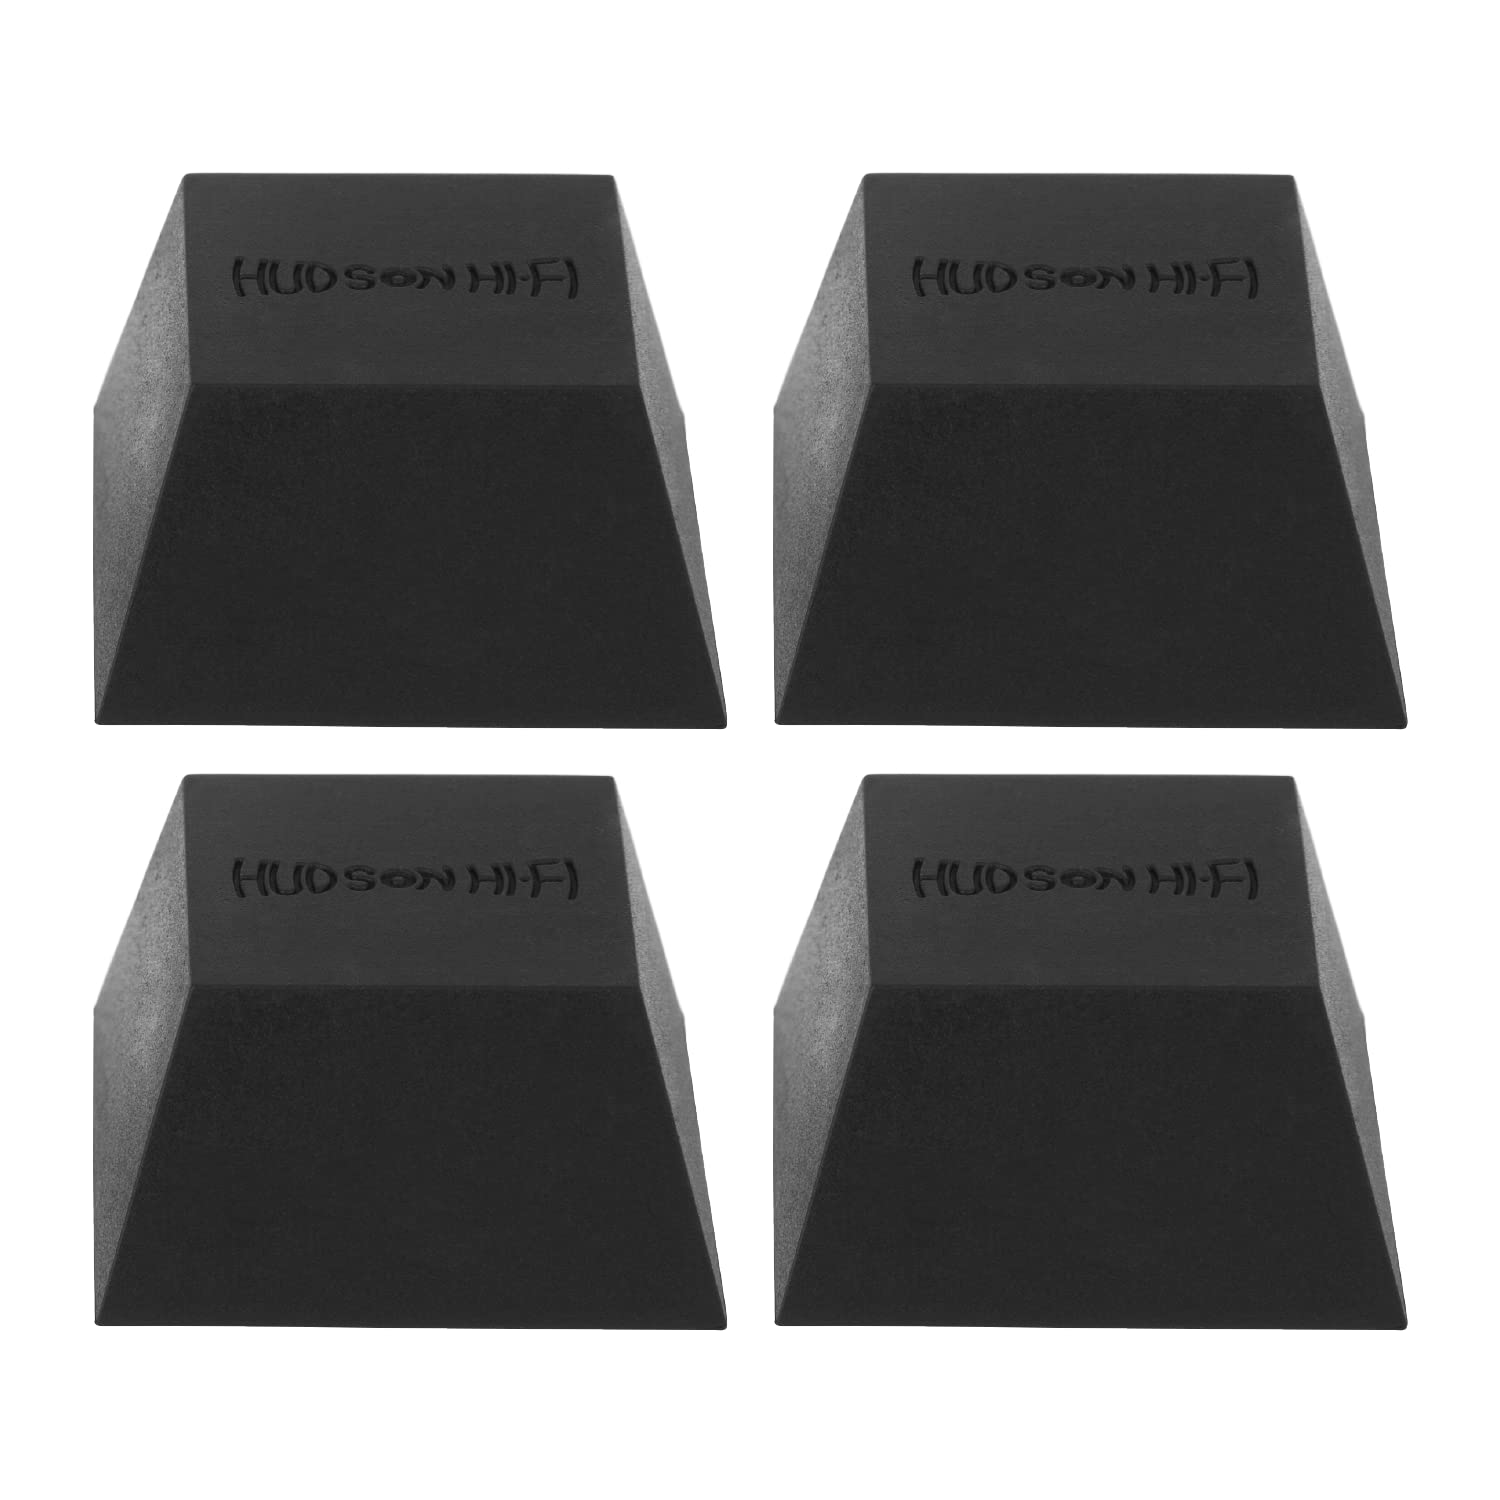 Hudson Hi-Fi Block Silicone Isolation Feet - 4-Pack Subwoofer Isolation Pad w/ 37.5 lbs Capacity - Pads for Small Speakers, Speaker S